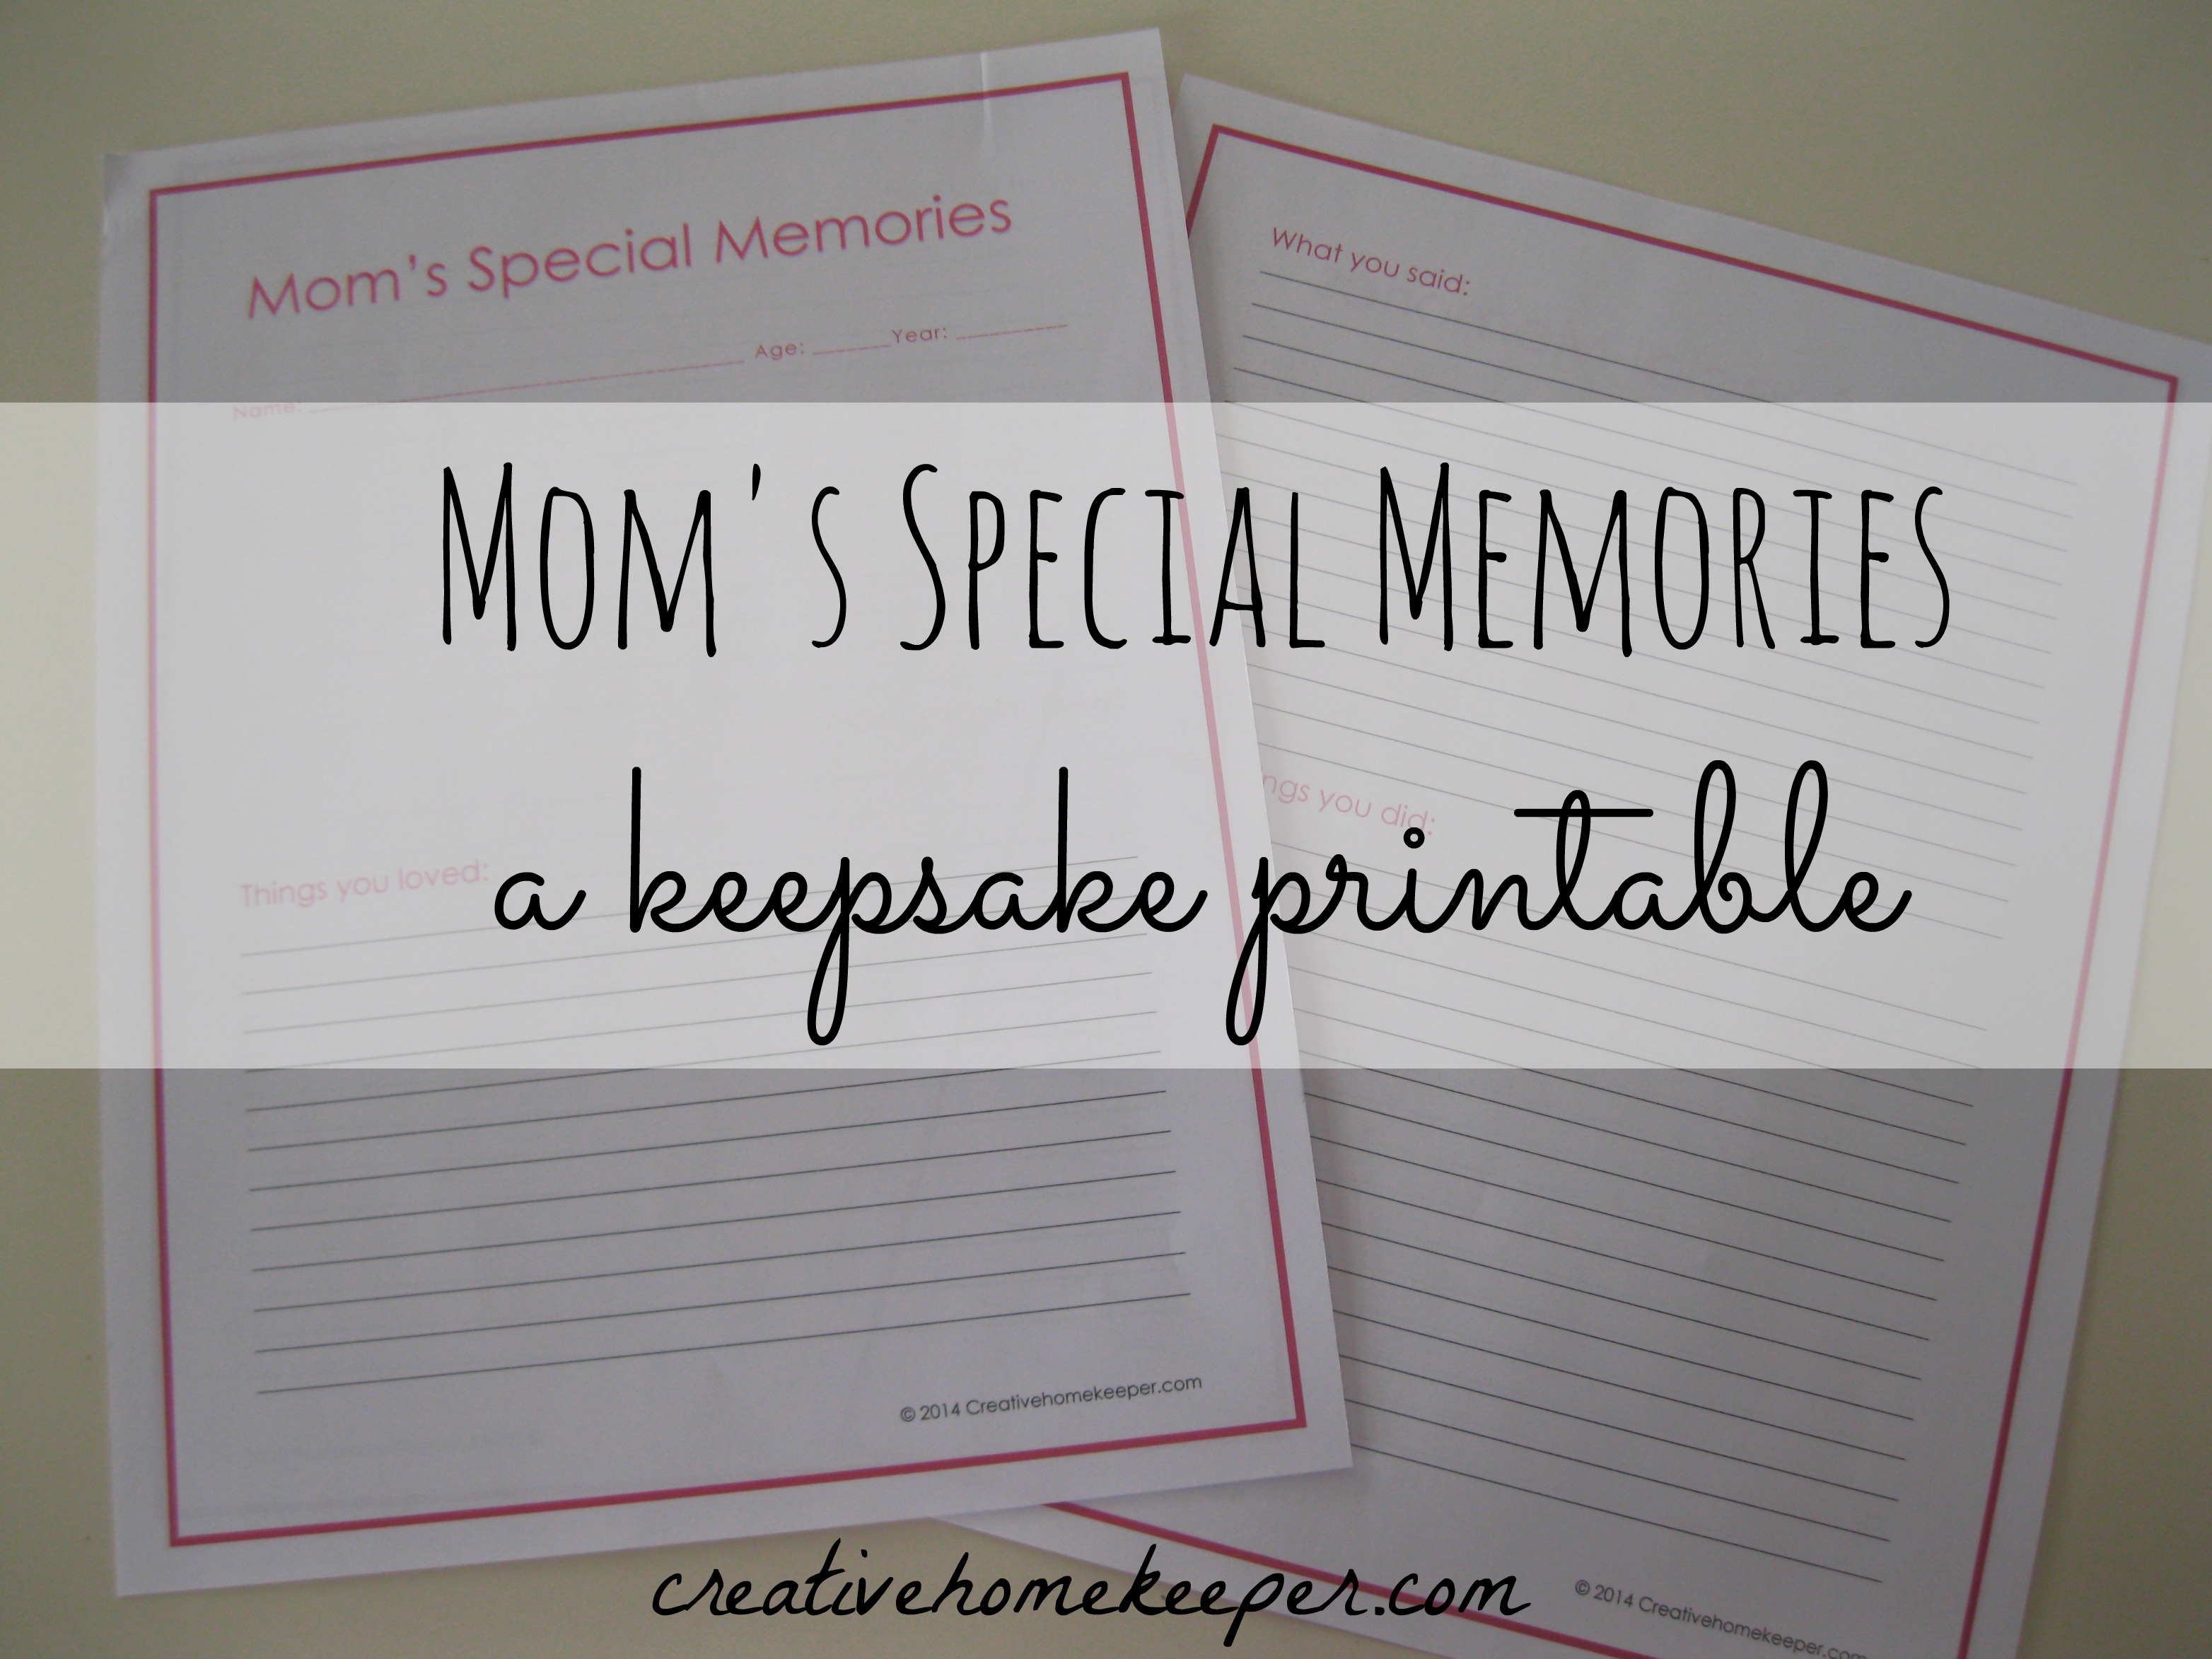 Mom's special memories is a keepsake printable to record all of those special everyday memories that you don't want to forget. | CreativeHomeKeeper.com